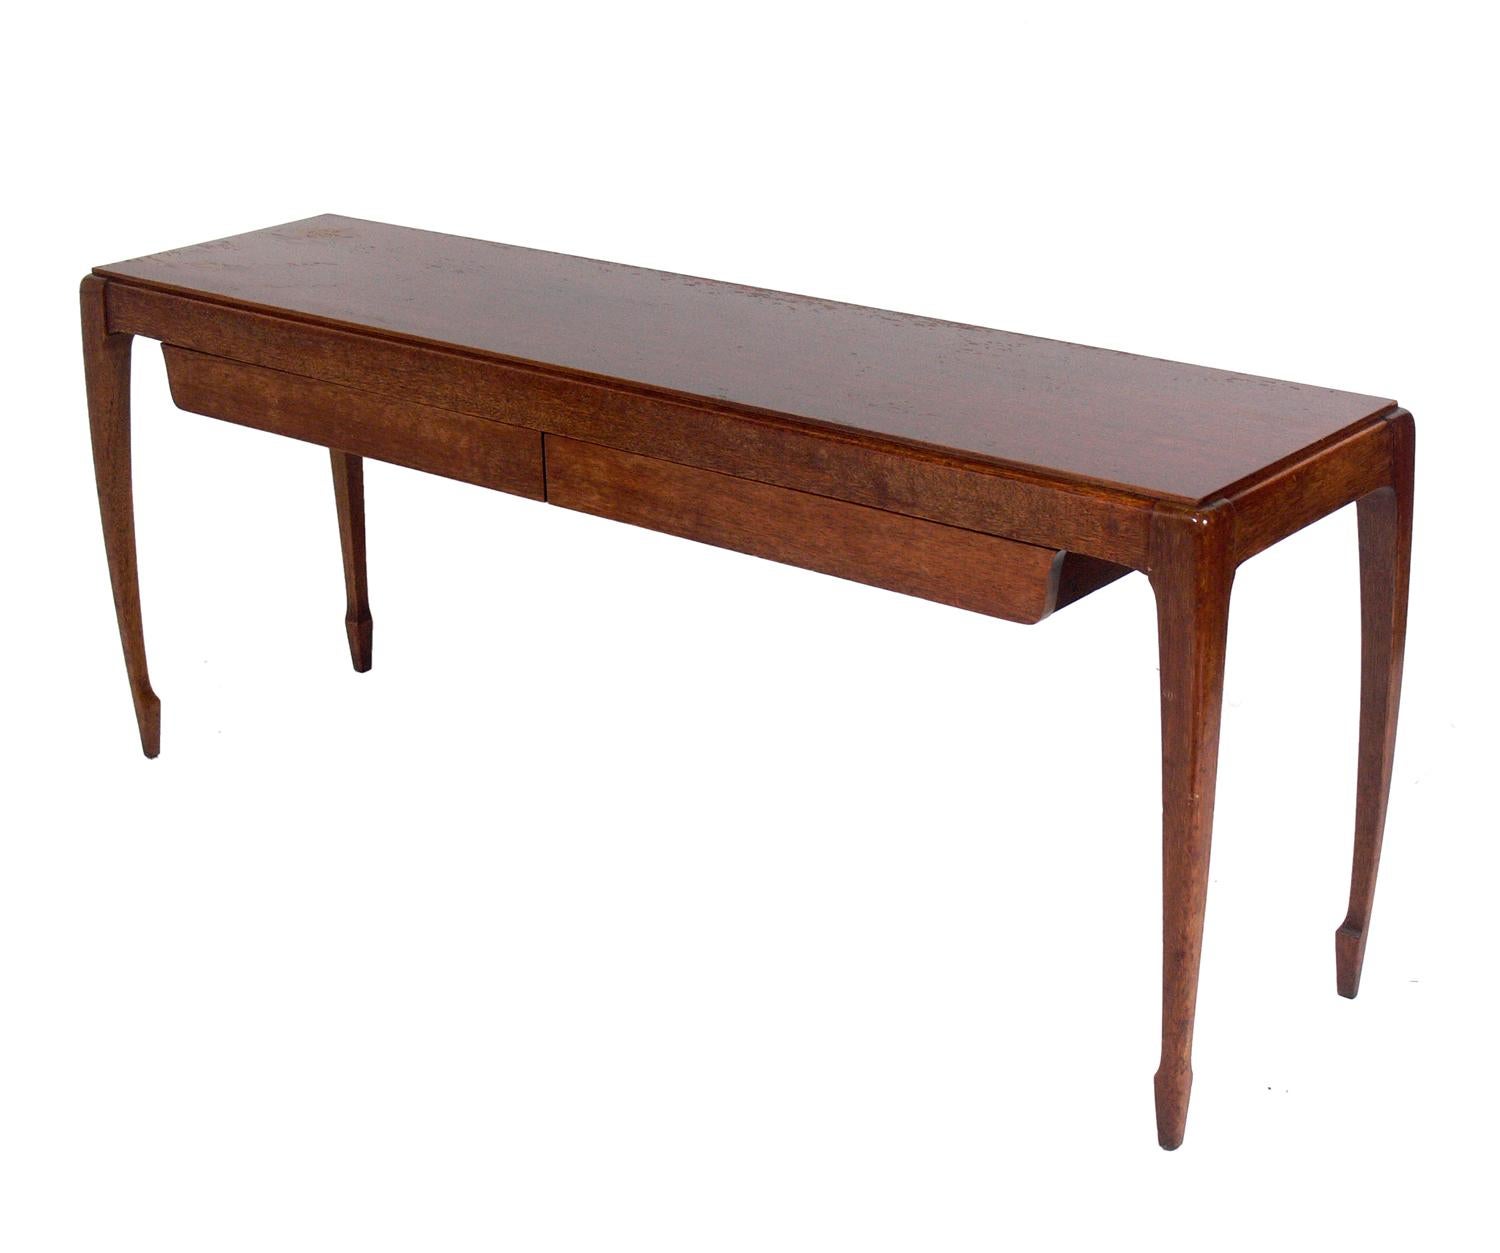 Asian Inspired Console or Sofa Table, designed for Brown Saltman, American, circa 1950s. It has two deep drawers for storage. This table is currently being refinished and can be completed in your choice of finish. The price noted below includes